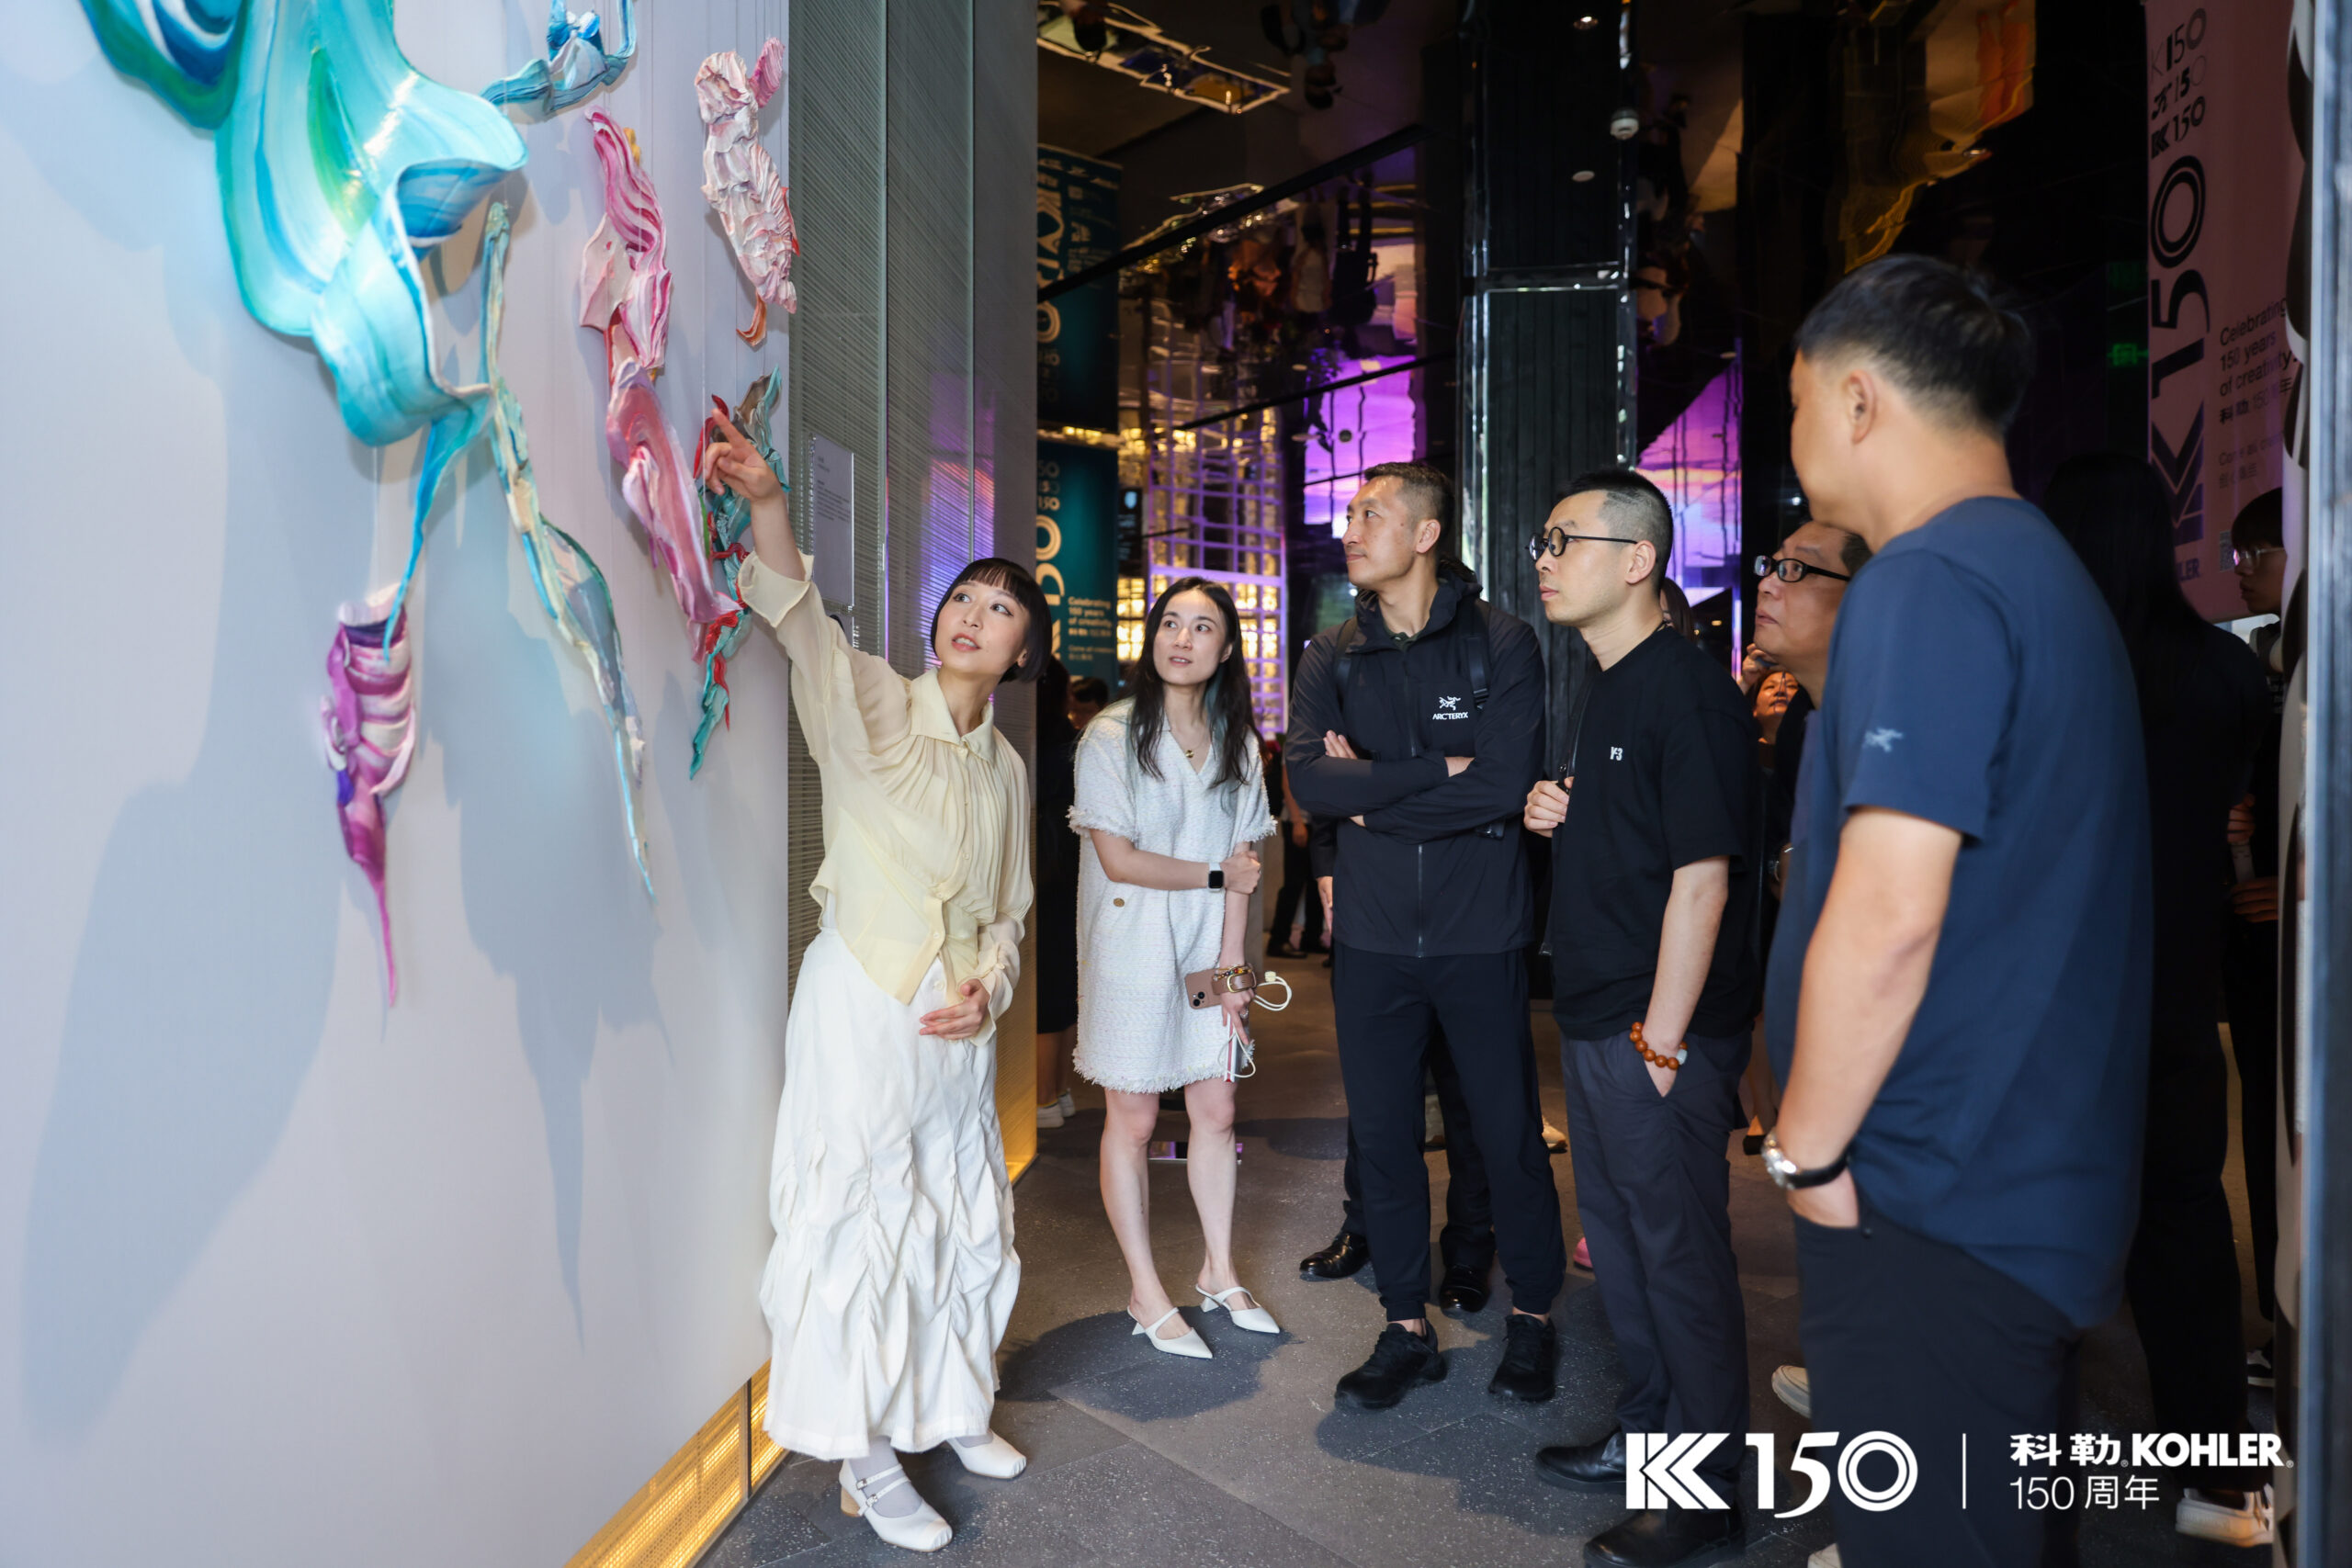 Ziling Wang presenting her installation 'A World on Strings' used for Kohler's limited Artists Editions for their 150th year anniversary